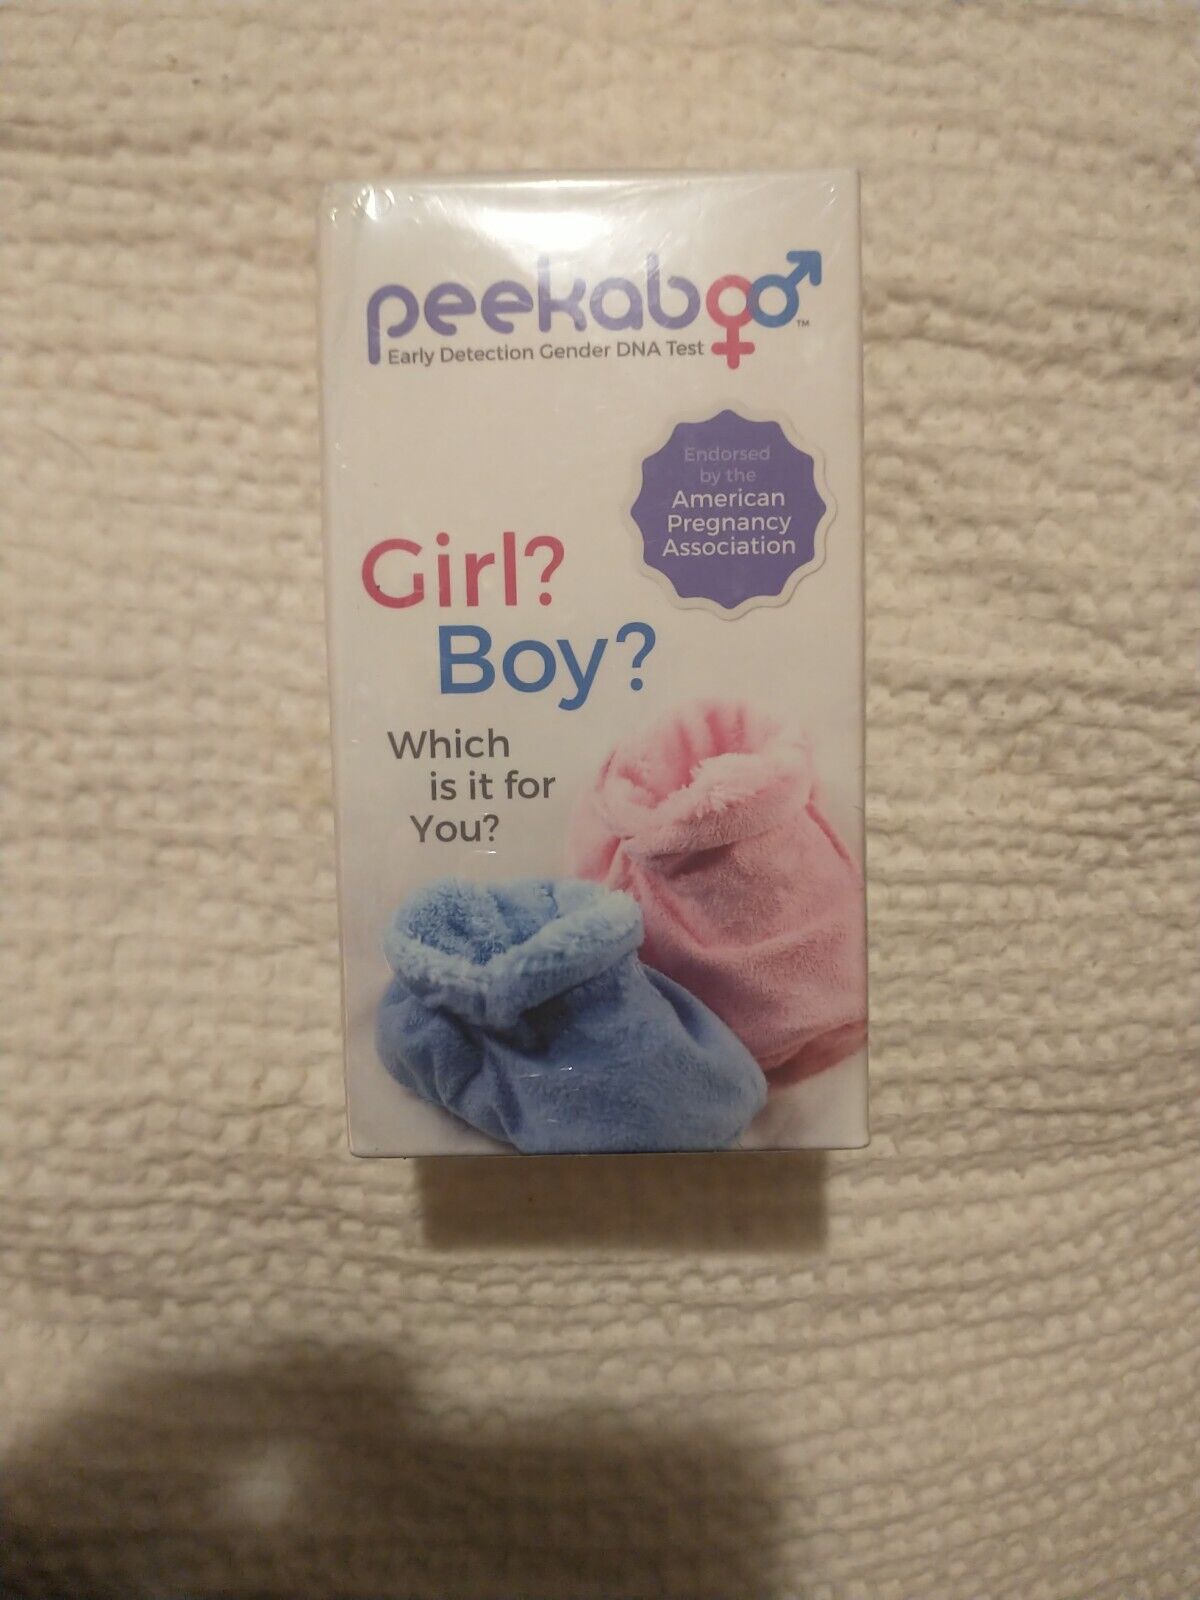 Peekaboo Early Detection Gender DNA Test New & Sealed Exp 11/30/22 - $54 Lab Fee